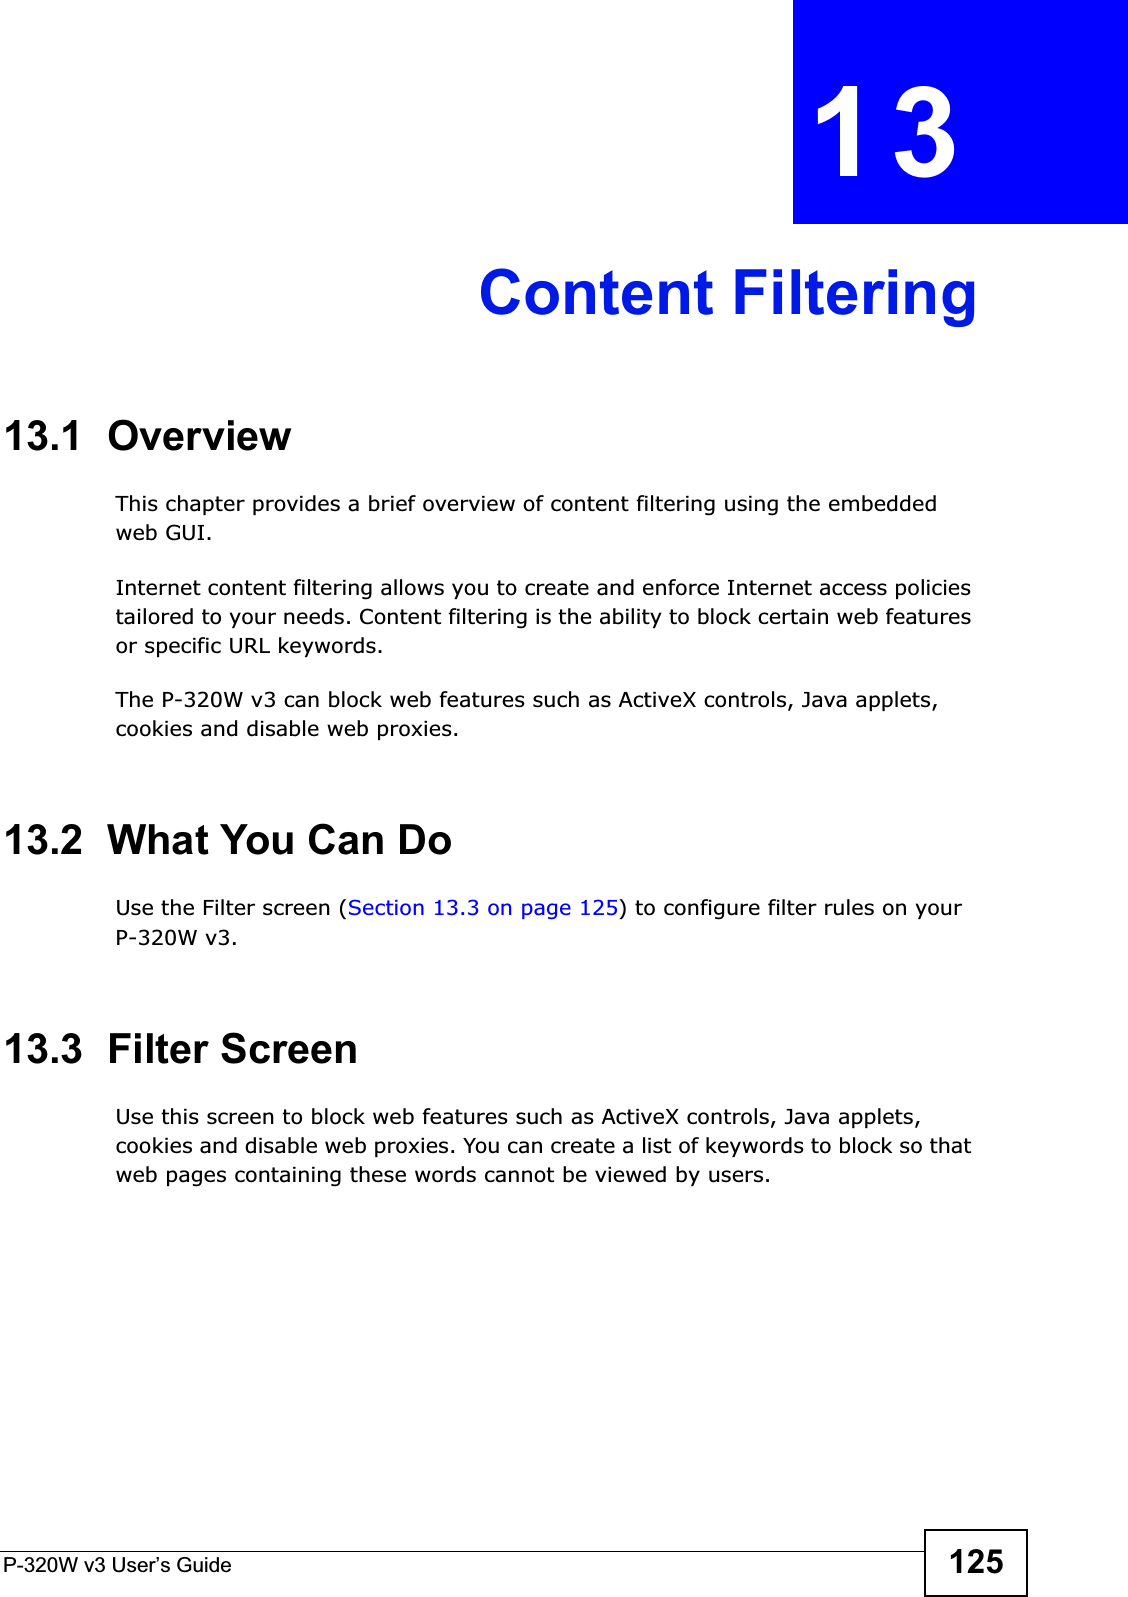 P-320W v3 User’s Guide 125CHAPTER 13Content Filtering13.1  OverviewThis chapter provides a brief overview of content filtering using the embedded web GUI.Internet content filtering allows you to create and enforce Internet access policies tailored to your needs. Content filtering is the ability to block certain web features or specific URL keywords.The P-320W v3 can block web features such as ActiveX controls, Java applets, cookies and disable web proxies. 13.2  What You Can DoUse the Filter screen (Section 13.3 on page 125) to configure filter rules on your P-320W v3.13.3  Filter ScreenUse this screen to block web features such as ActiveX controls, Java applets, cookies and disable web proxies. You can create a list of keywords to block so that web pages containing these words cannot be viewed by users.